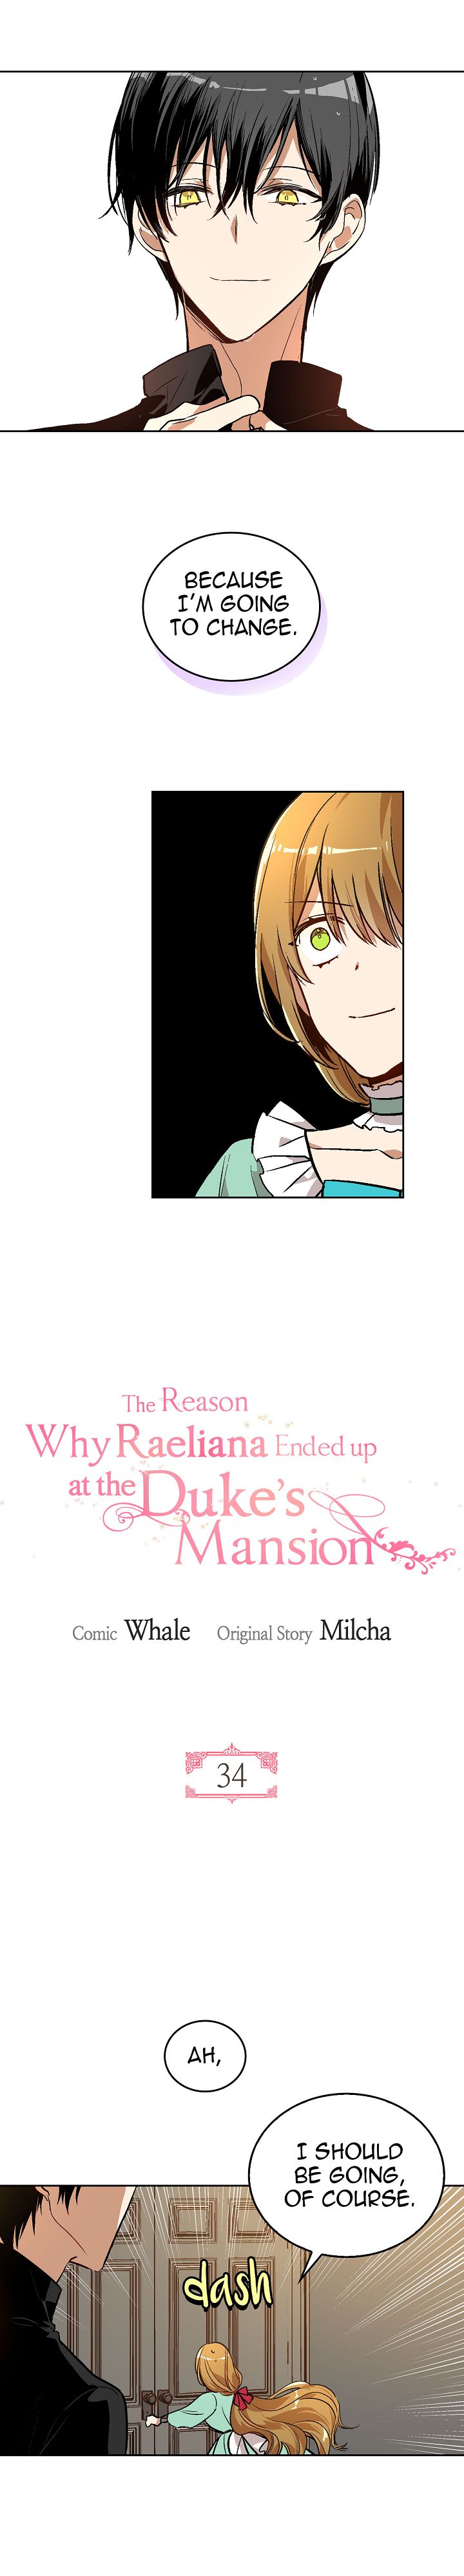 The Reason Why Raeliana Ended Up At The Duke’S Mansion - Page 1